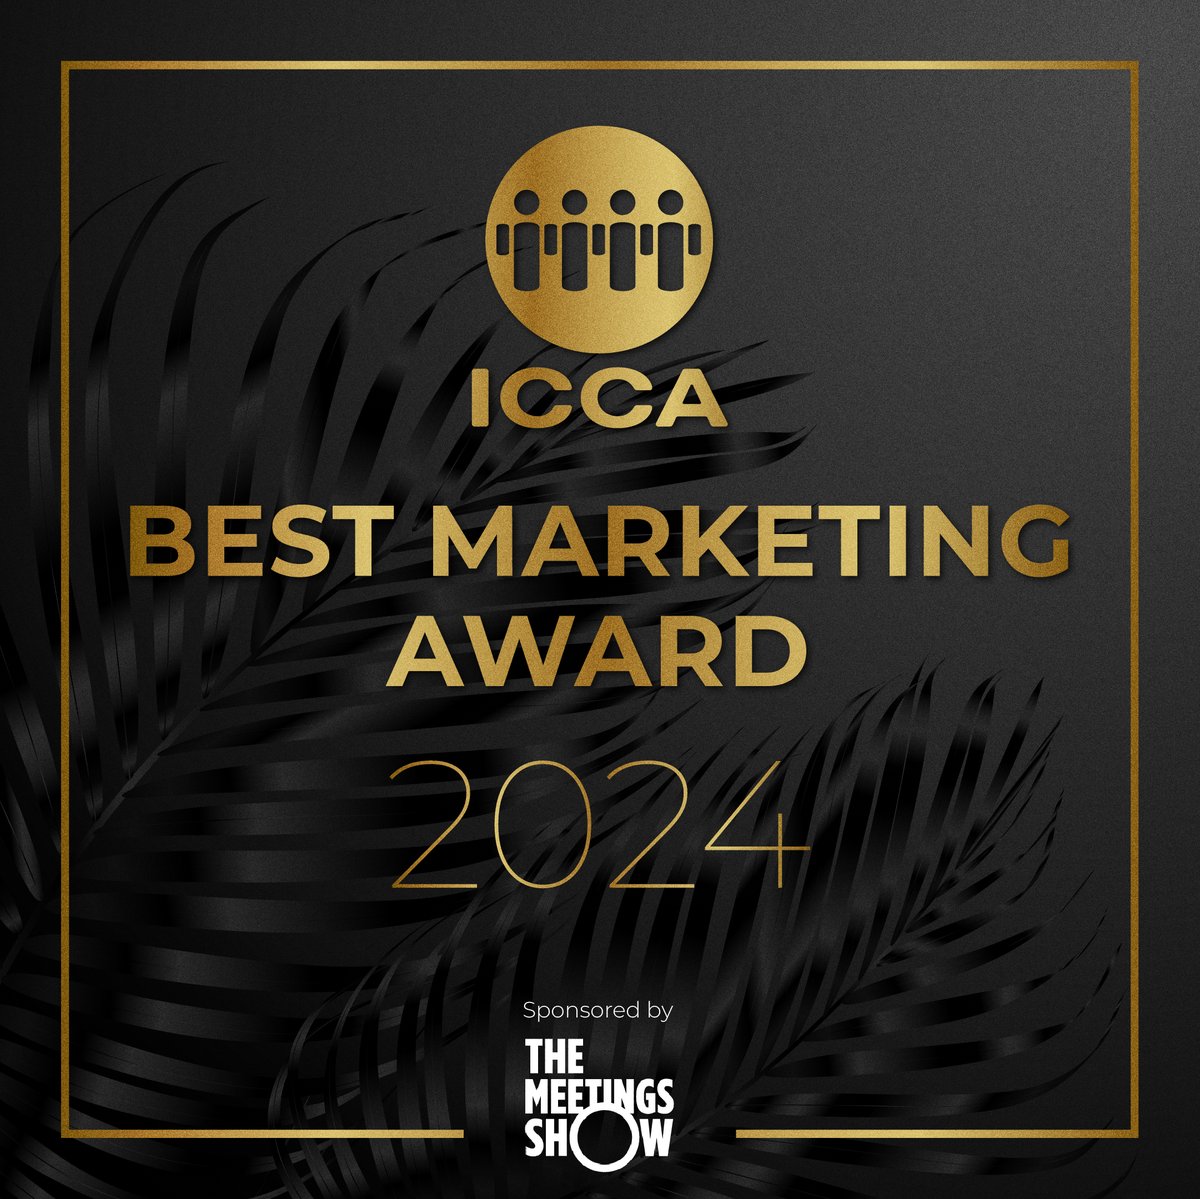 We are excited to announce the 2024 #ICCABestMarketingAward sponsored by @MeetingsShow. This year's theme is 'Once Upon a Time – The Art of Marketing as Storytelling.' The story begins with you. Submit your entry for your chance to claim the #BMA2024 👉iccaworld.org/global-industr…